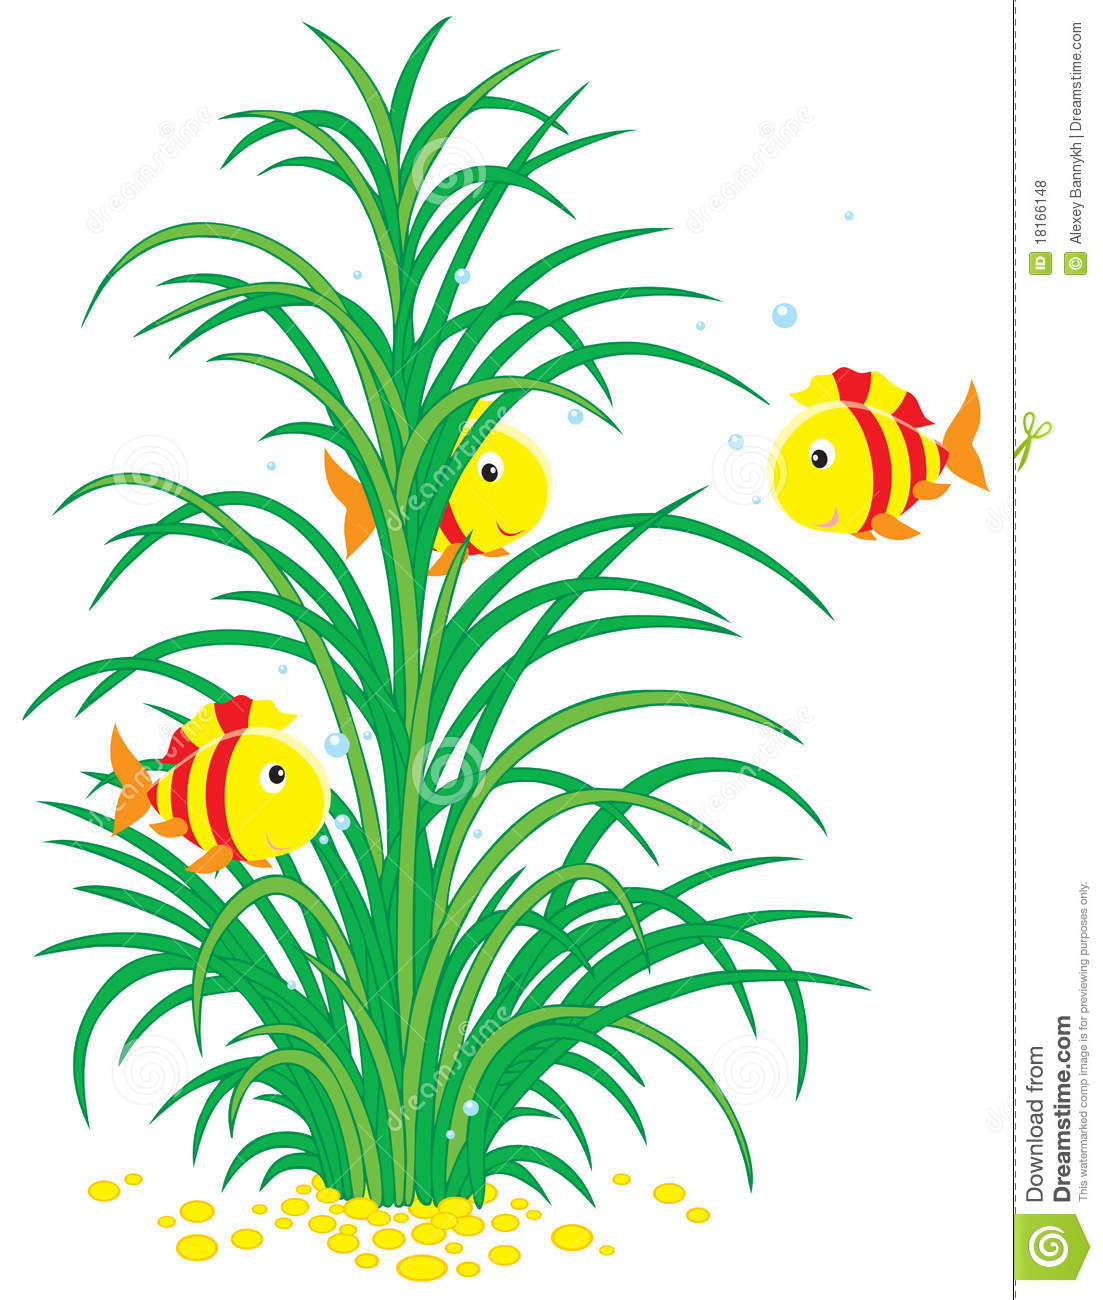 Coral Seaweed Clipart   Cliparthut   Free Clipart